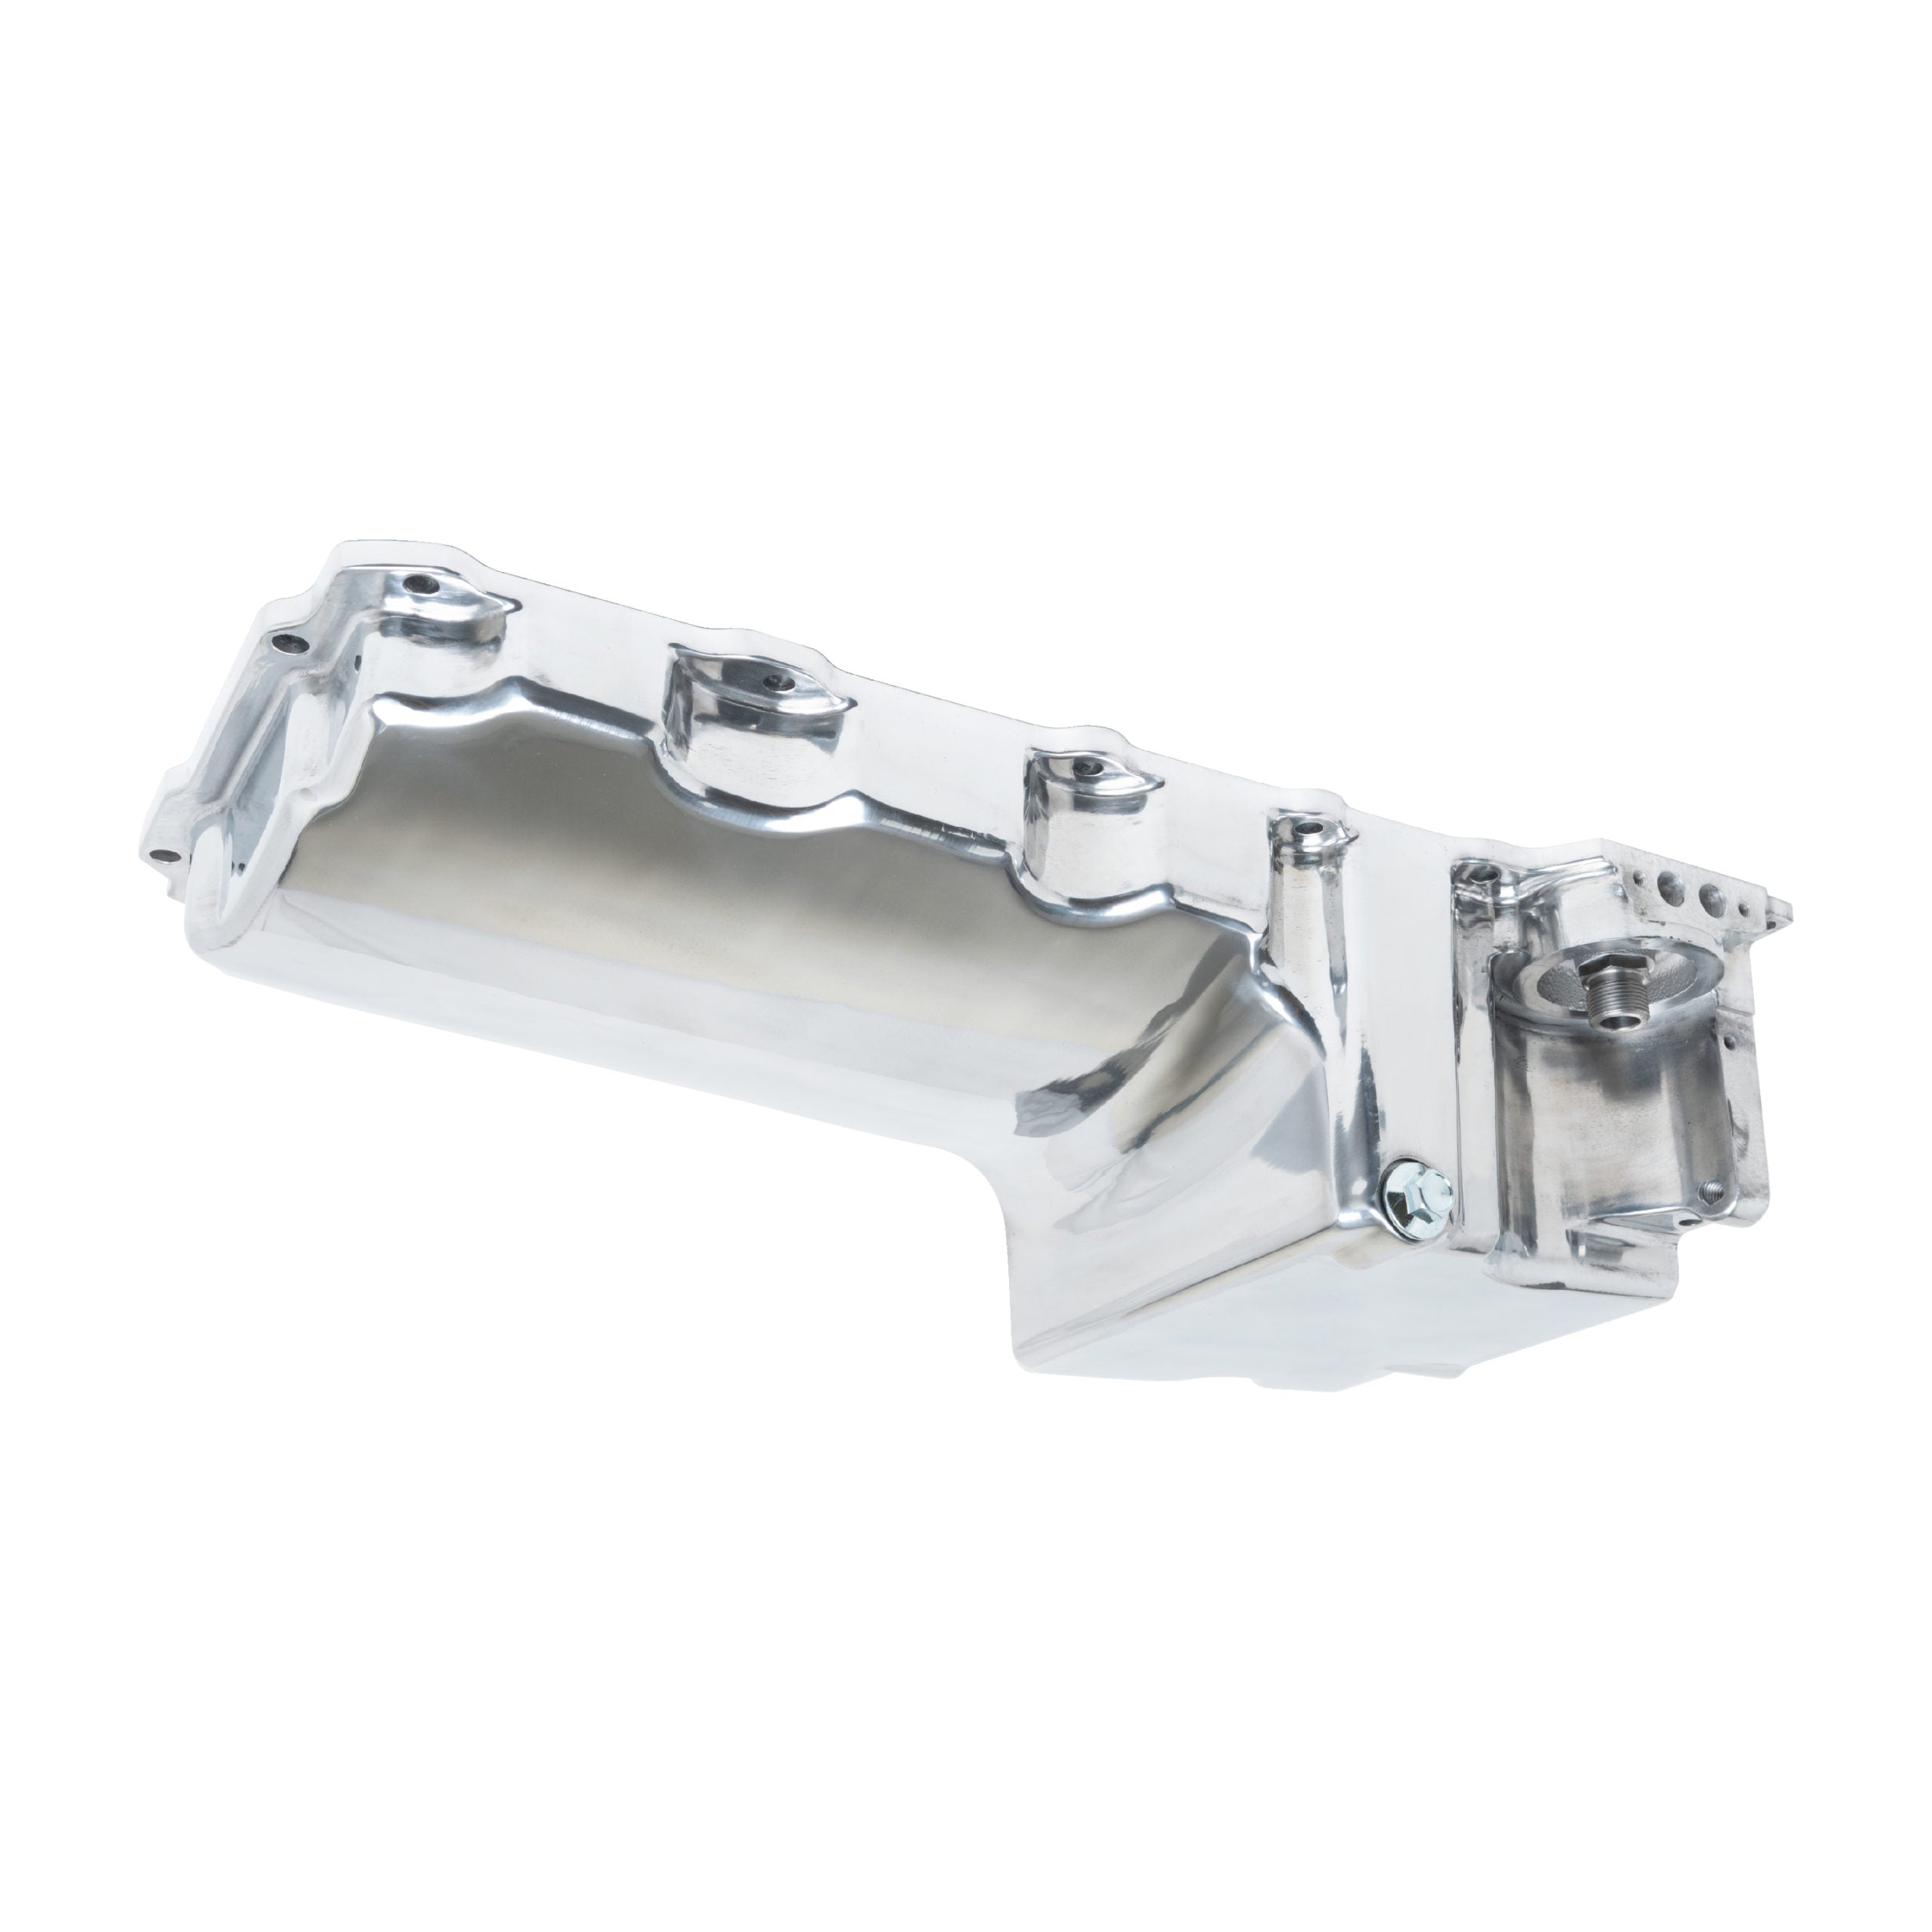 Racing Power Company R8460POL Retro Fit Aluminum Oil Pan - Polished